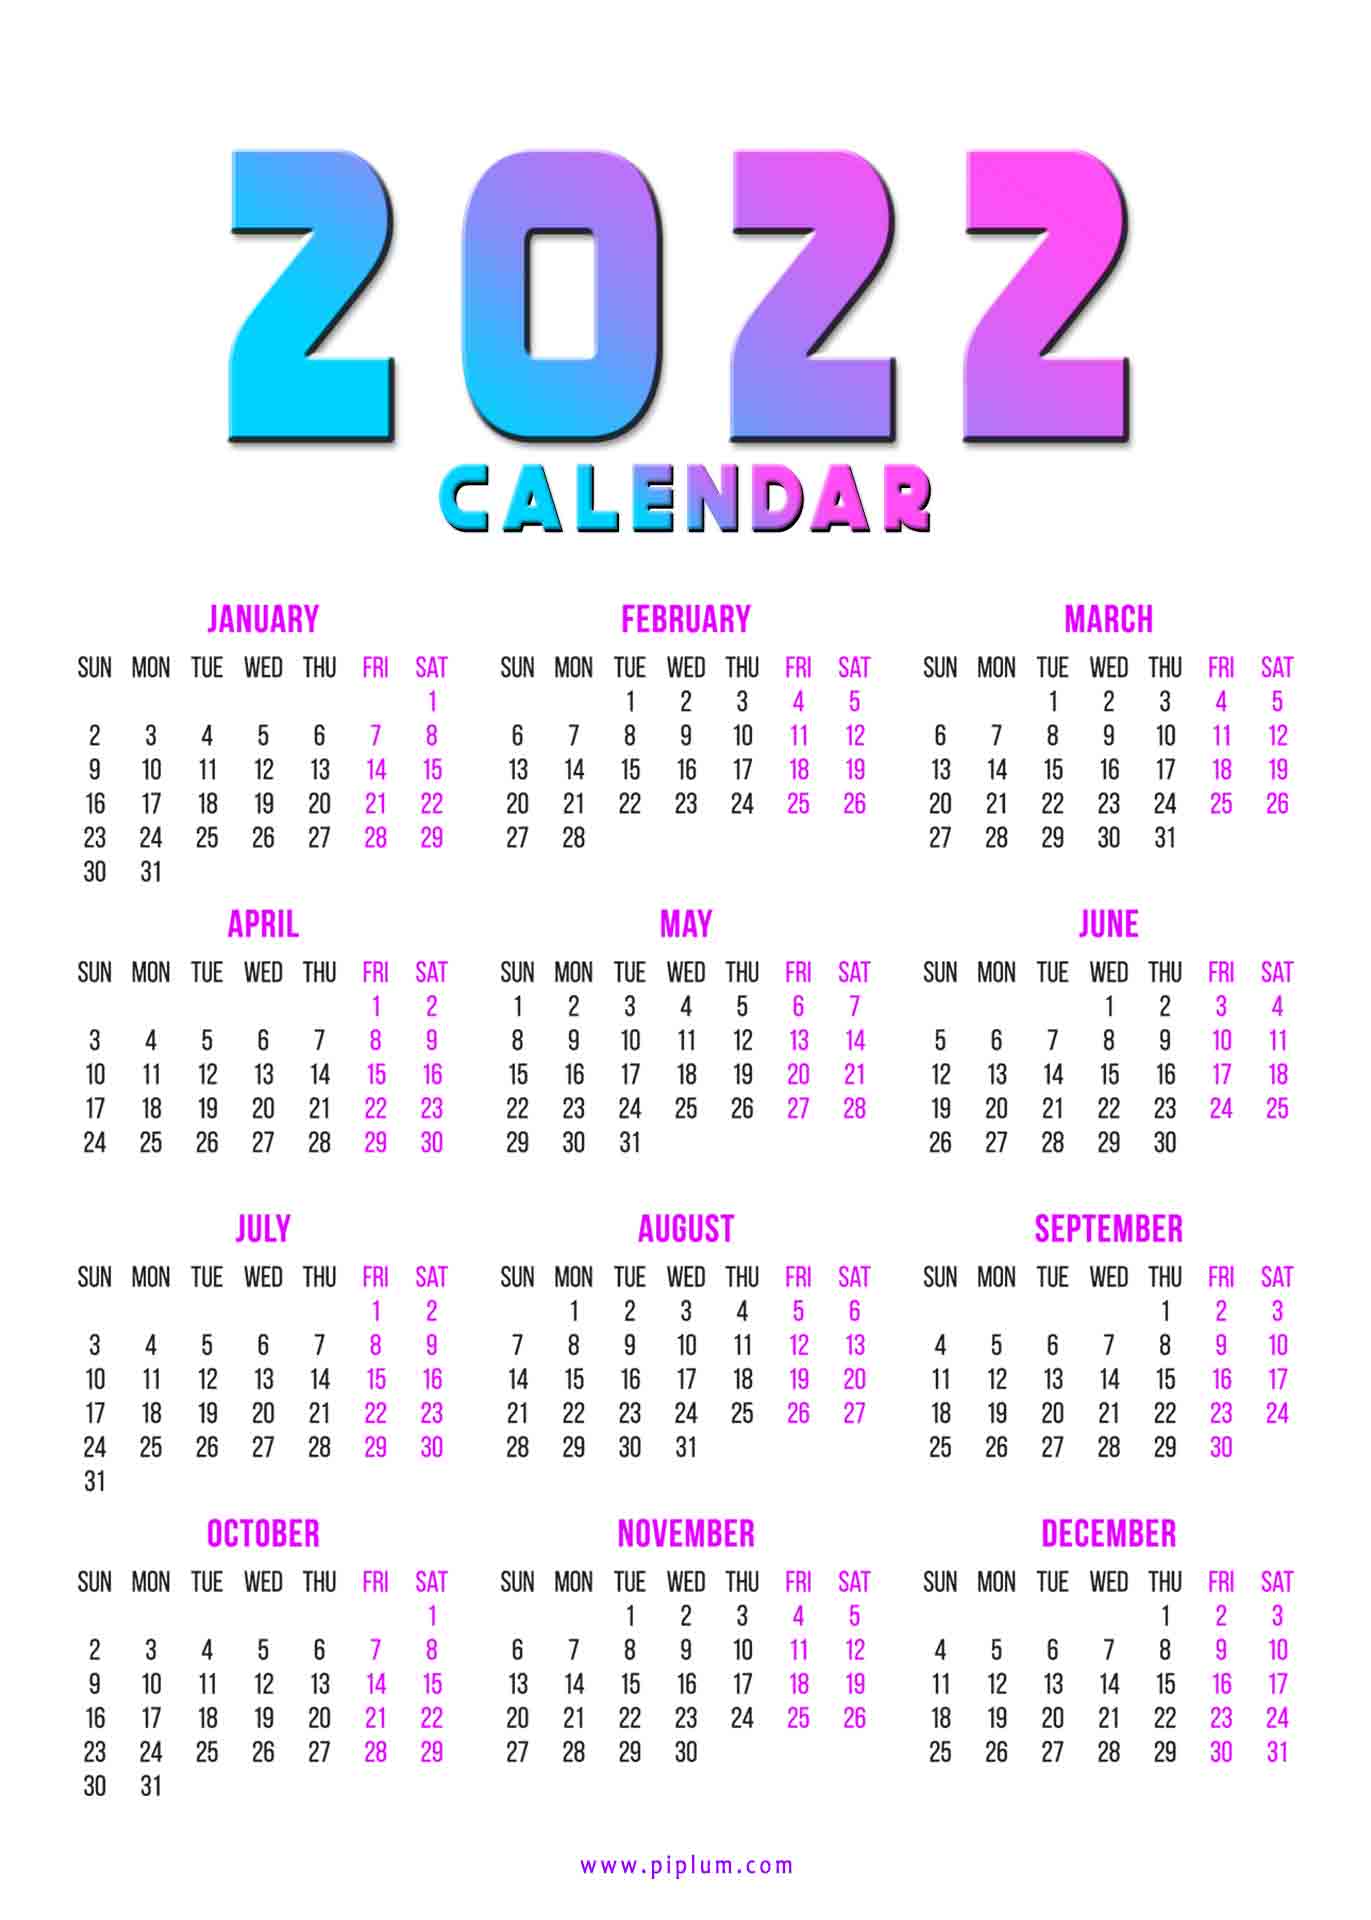 Free 2022 Calendar By Mail Free 2022 Calendar! Printable And Download Ready!